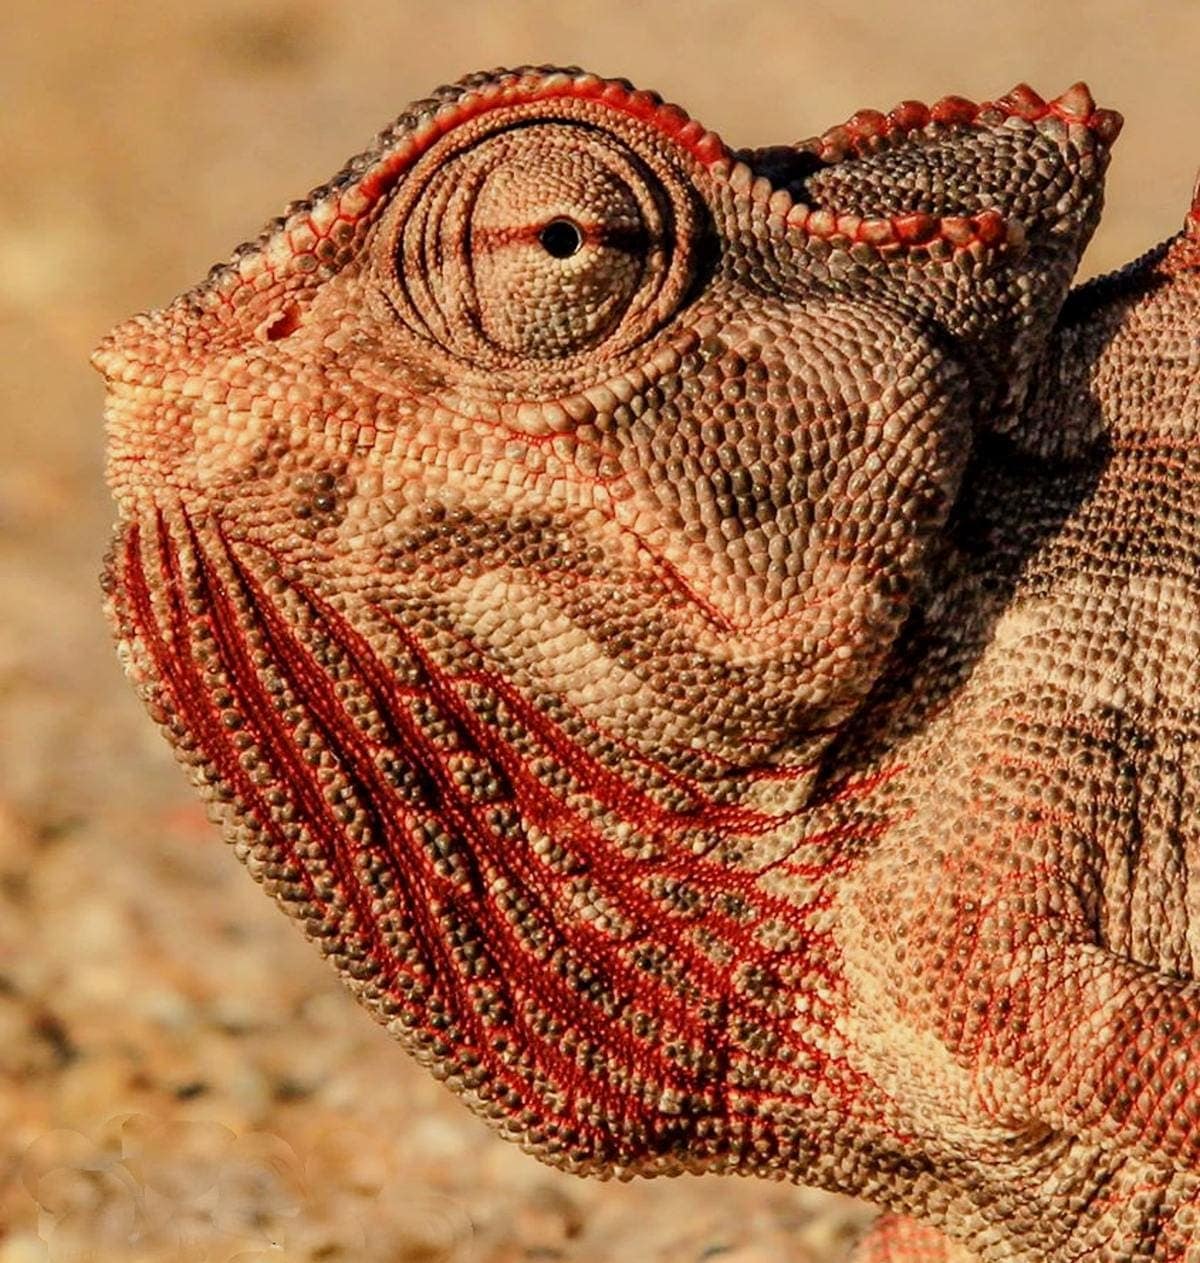 close up of chameleon face in desert with brown and red stripes on face